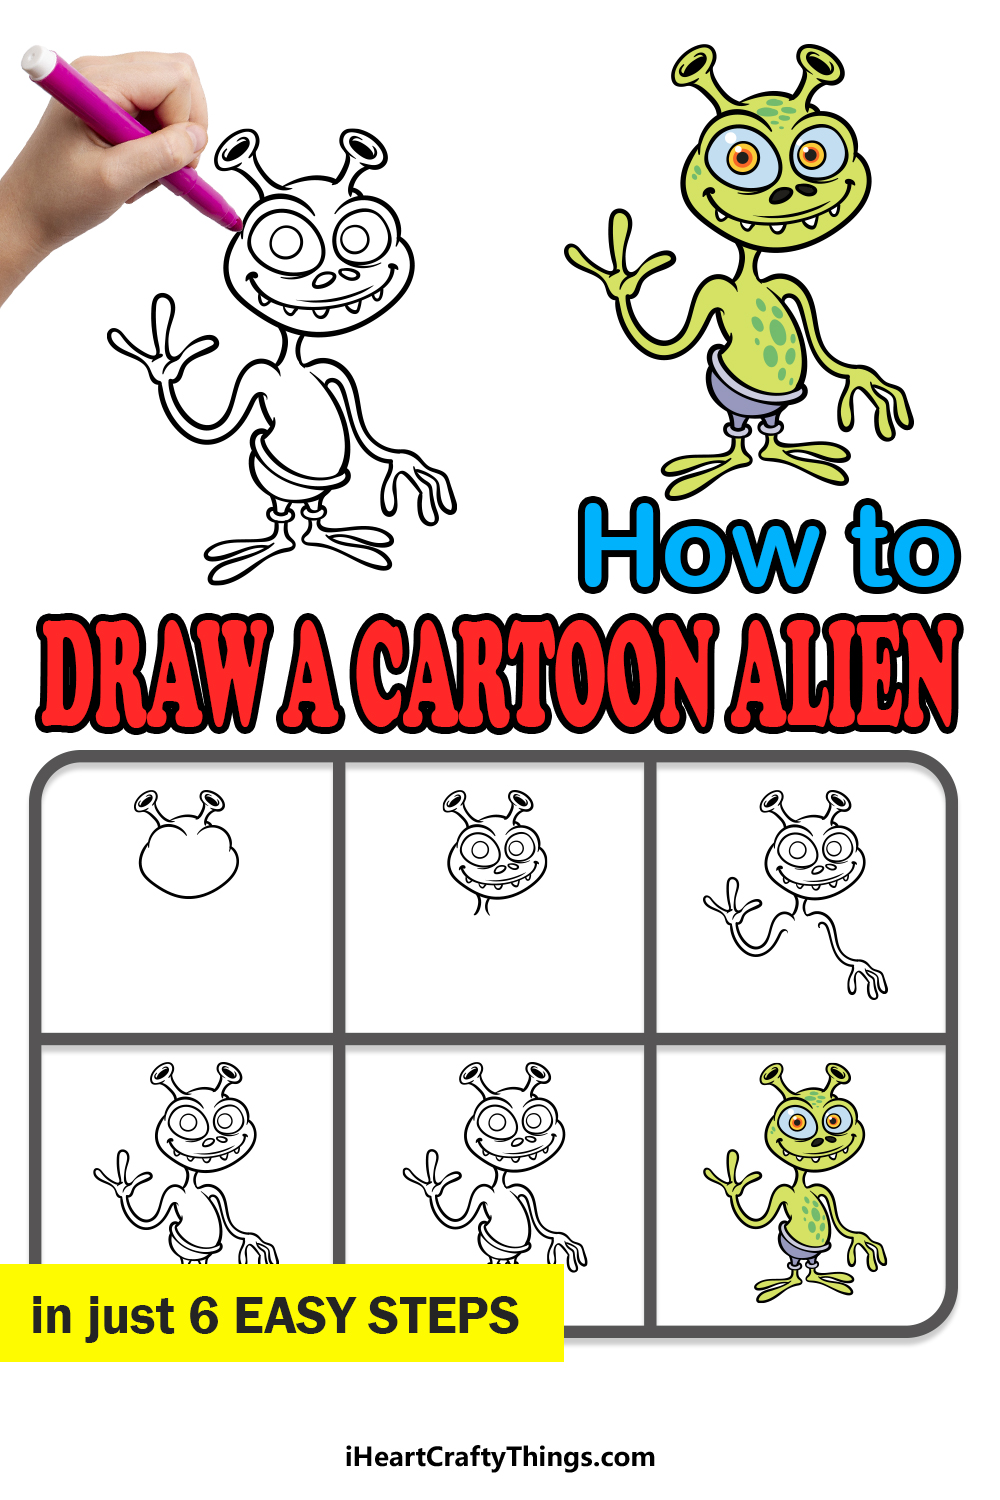 how to draw a Cartoon Alien in 6 easy steps